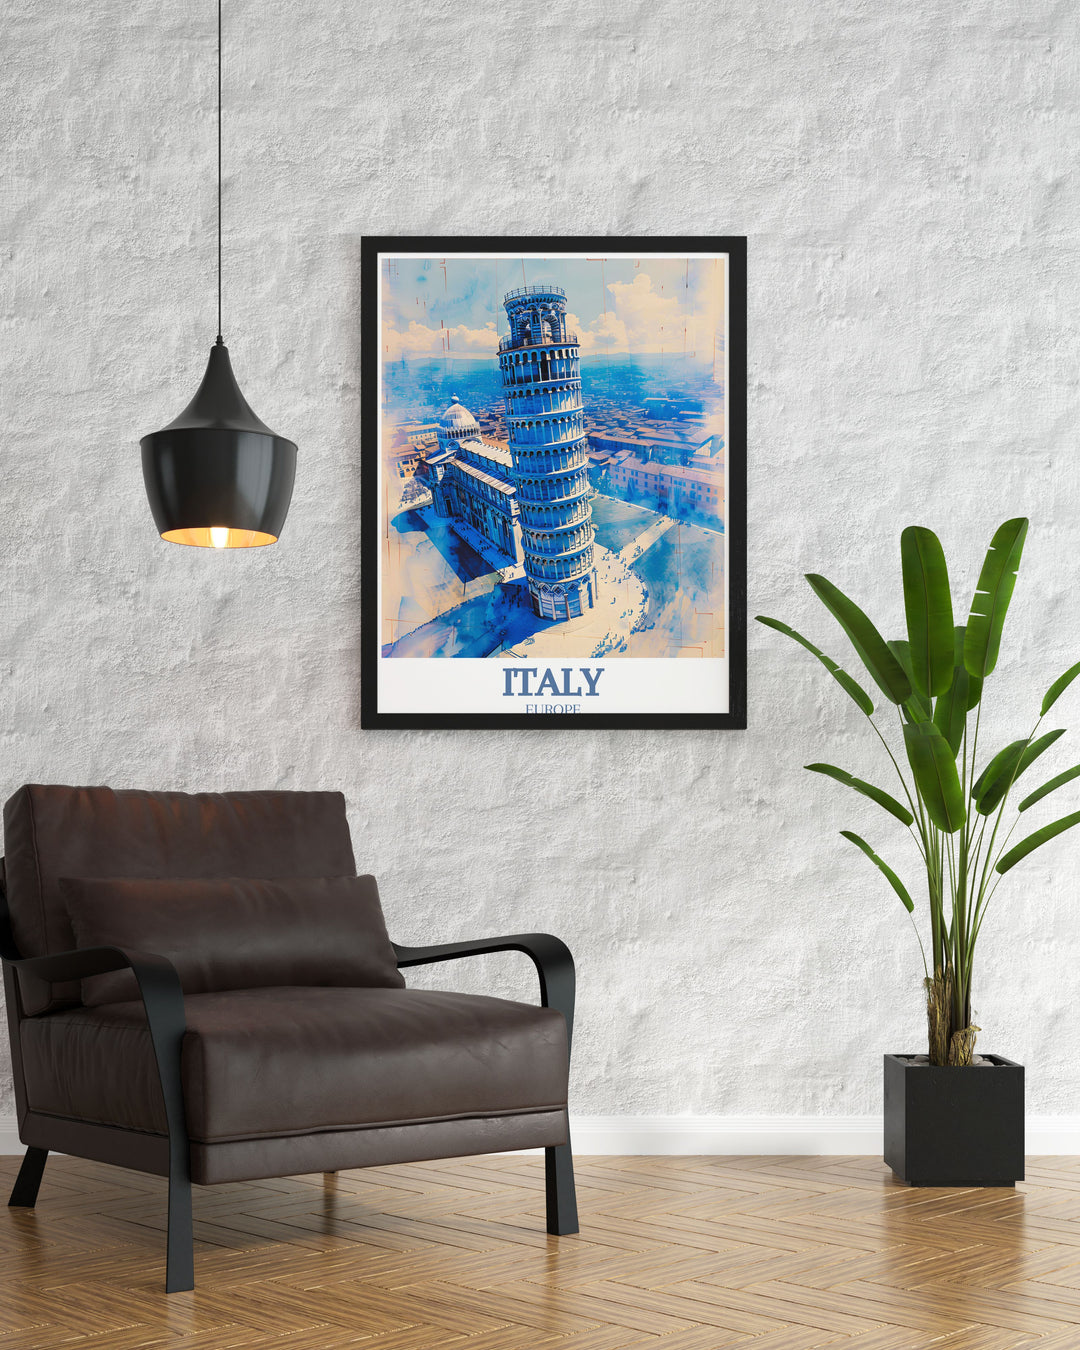 Featuring Italys Leaning Tower of Pisa and Pisa Cathedral, this poster captures the essence of Pisas architectural brilliance, making it a standout piece in any decor.